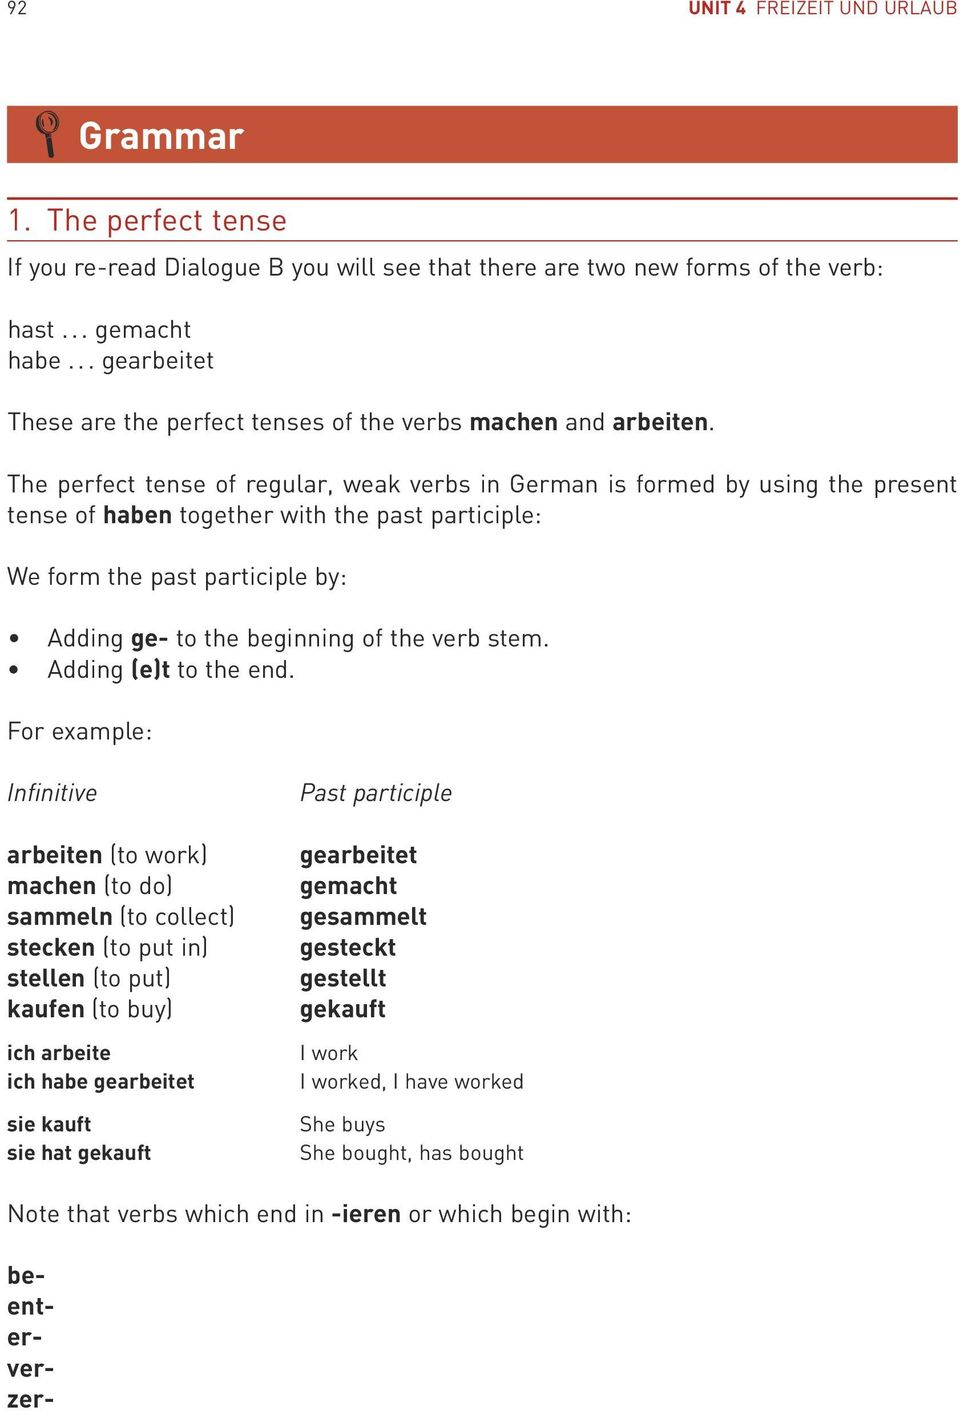 The perfect tense of regular, weak verbs in German is formed by using the present tense of haben together with the past participle: We form the past participle by: Adding ge- to the beginning of the